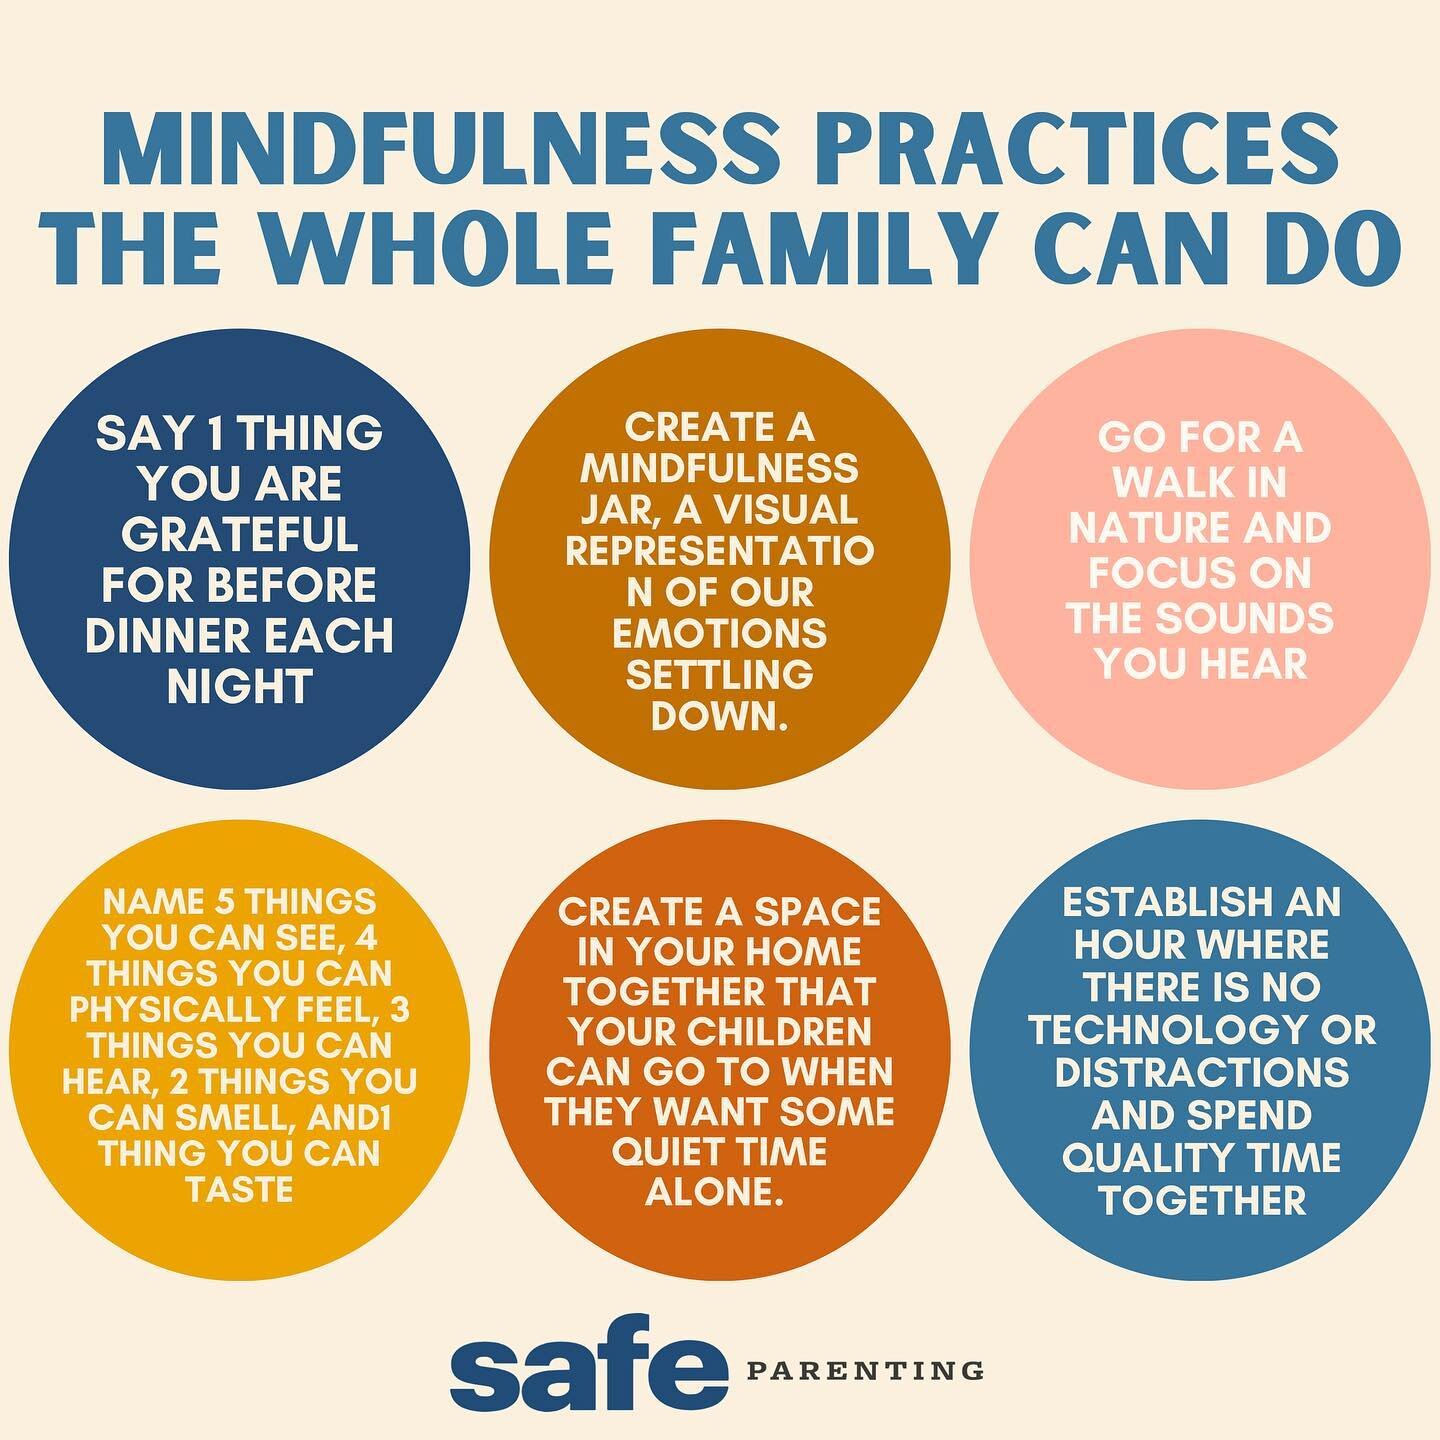 Mindfulness is actively taking time to detach yourself from the chaos of the day and find some calm.  Studies have found that mindfullness can be utilized to reduce anxiety, improve focus, manage stress, regulate emotions, and become more positive ov